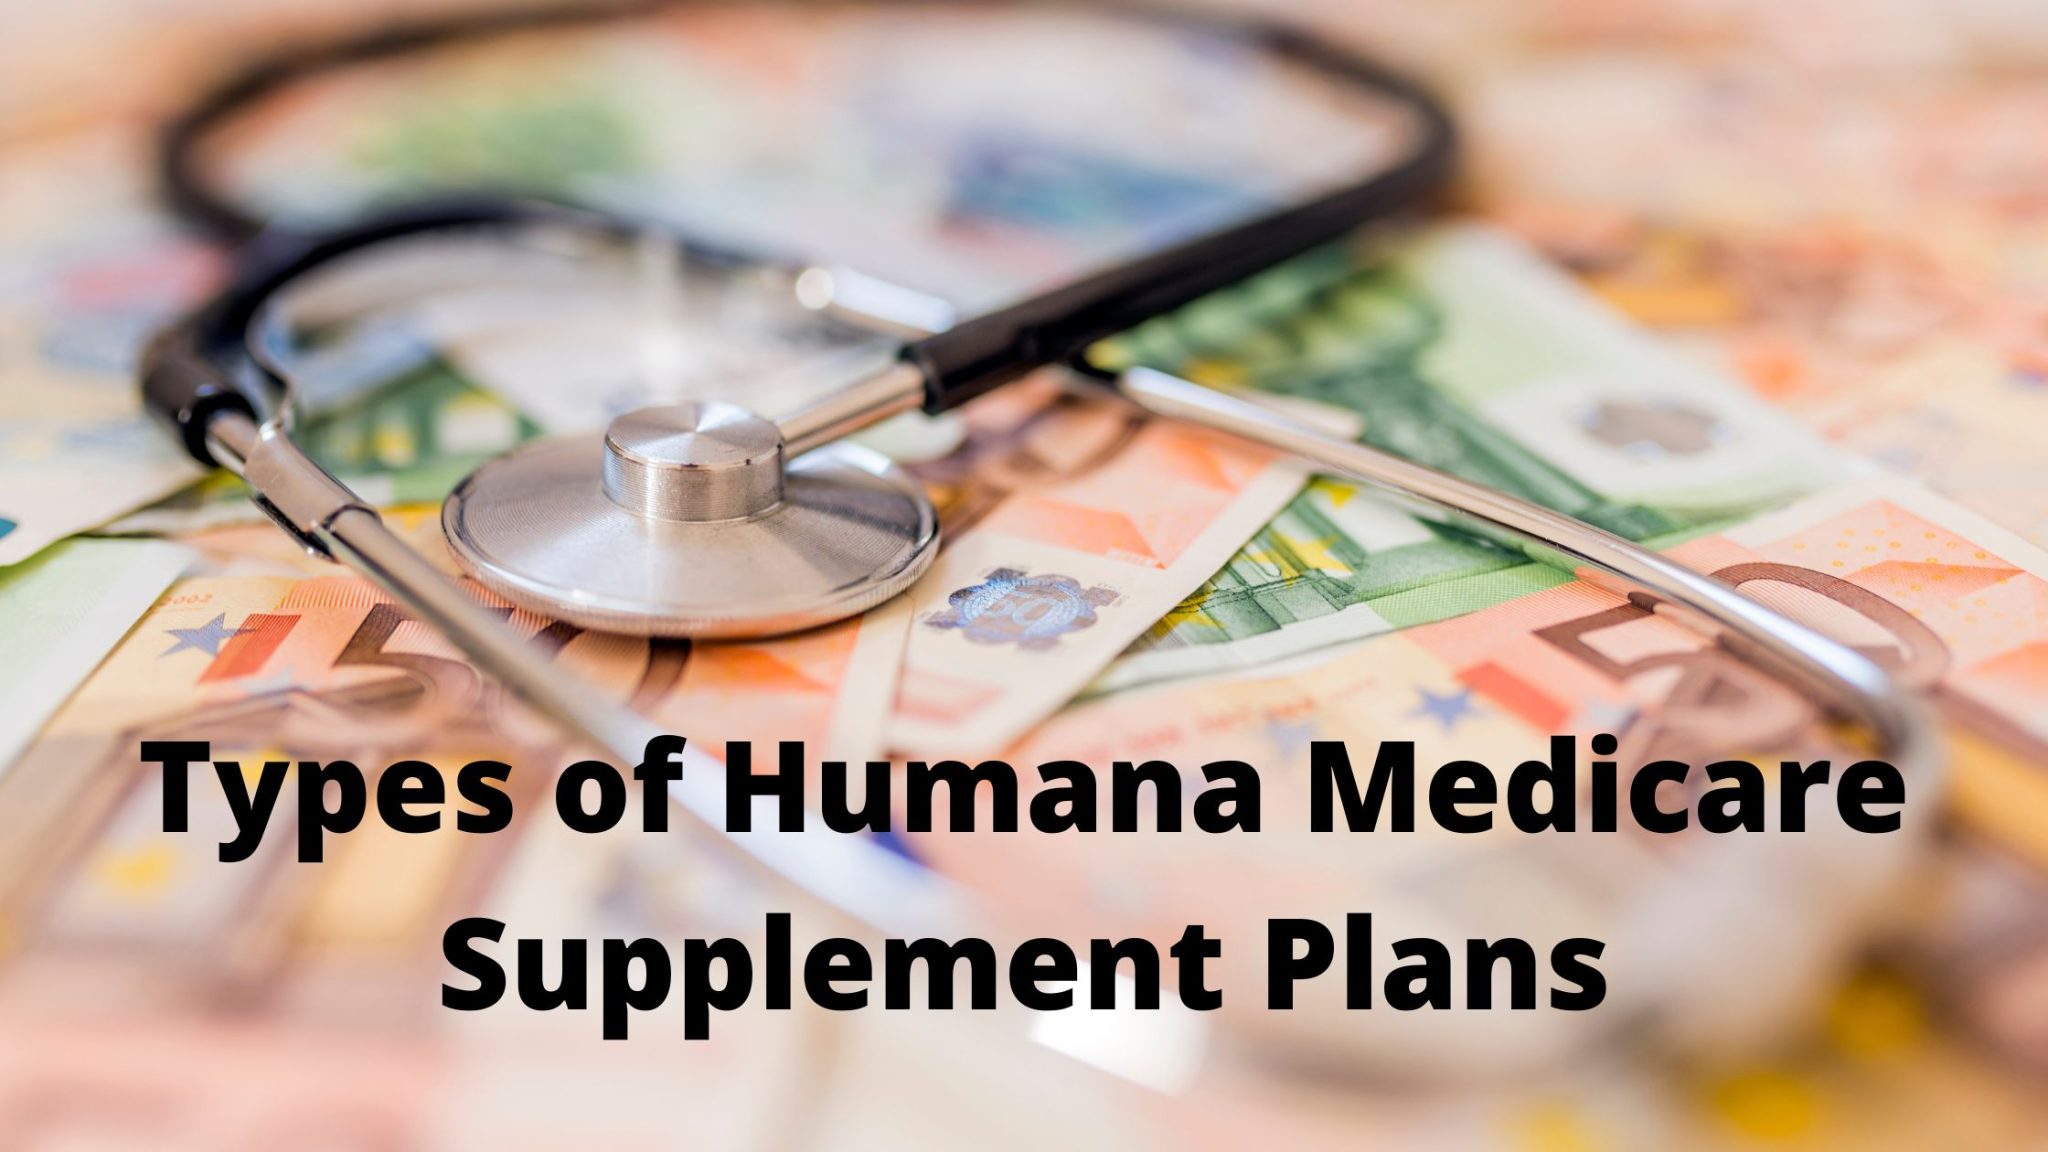 Types of Humana Medicare Supplement Plans